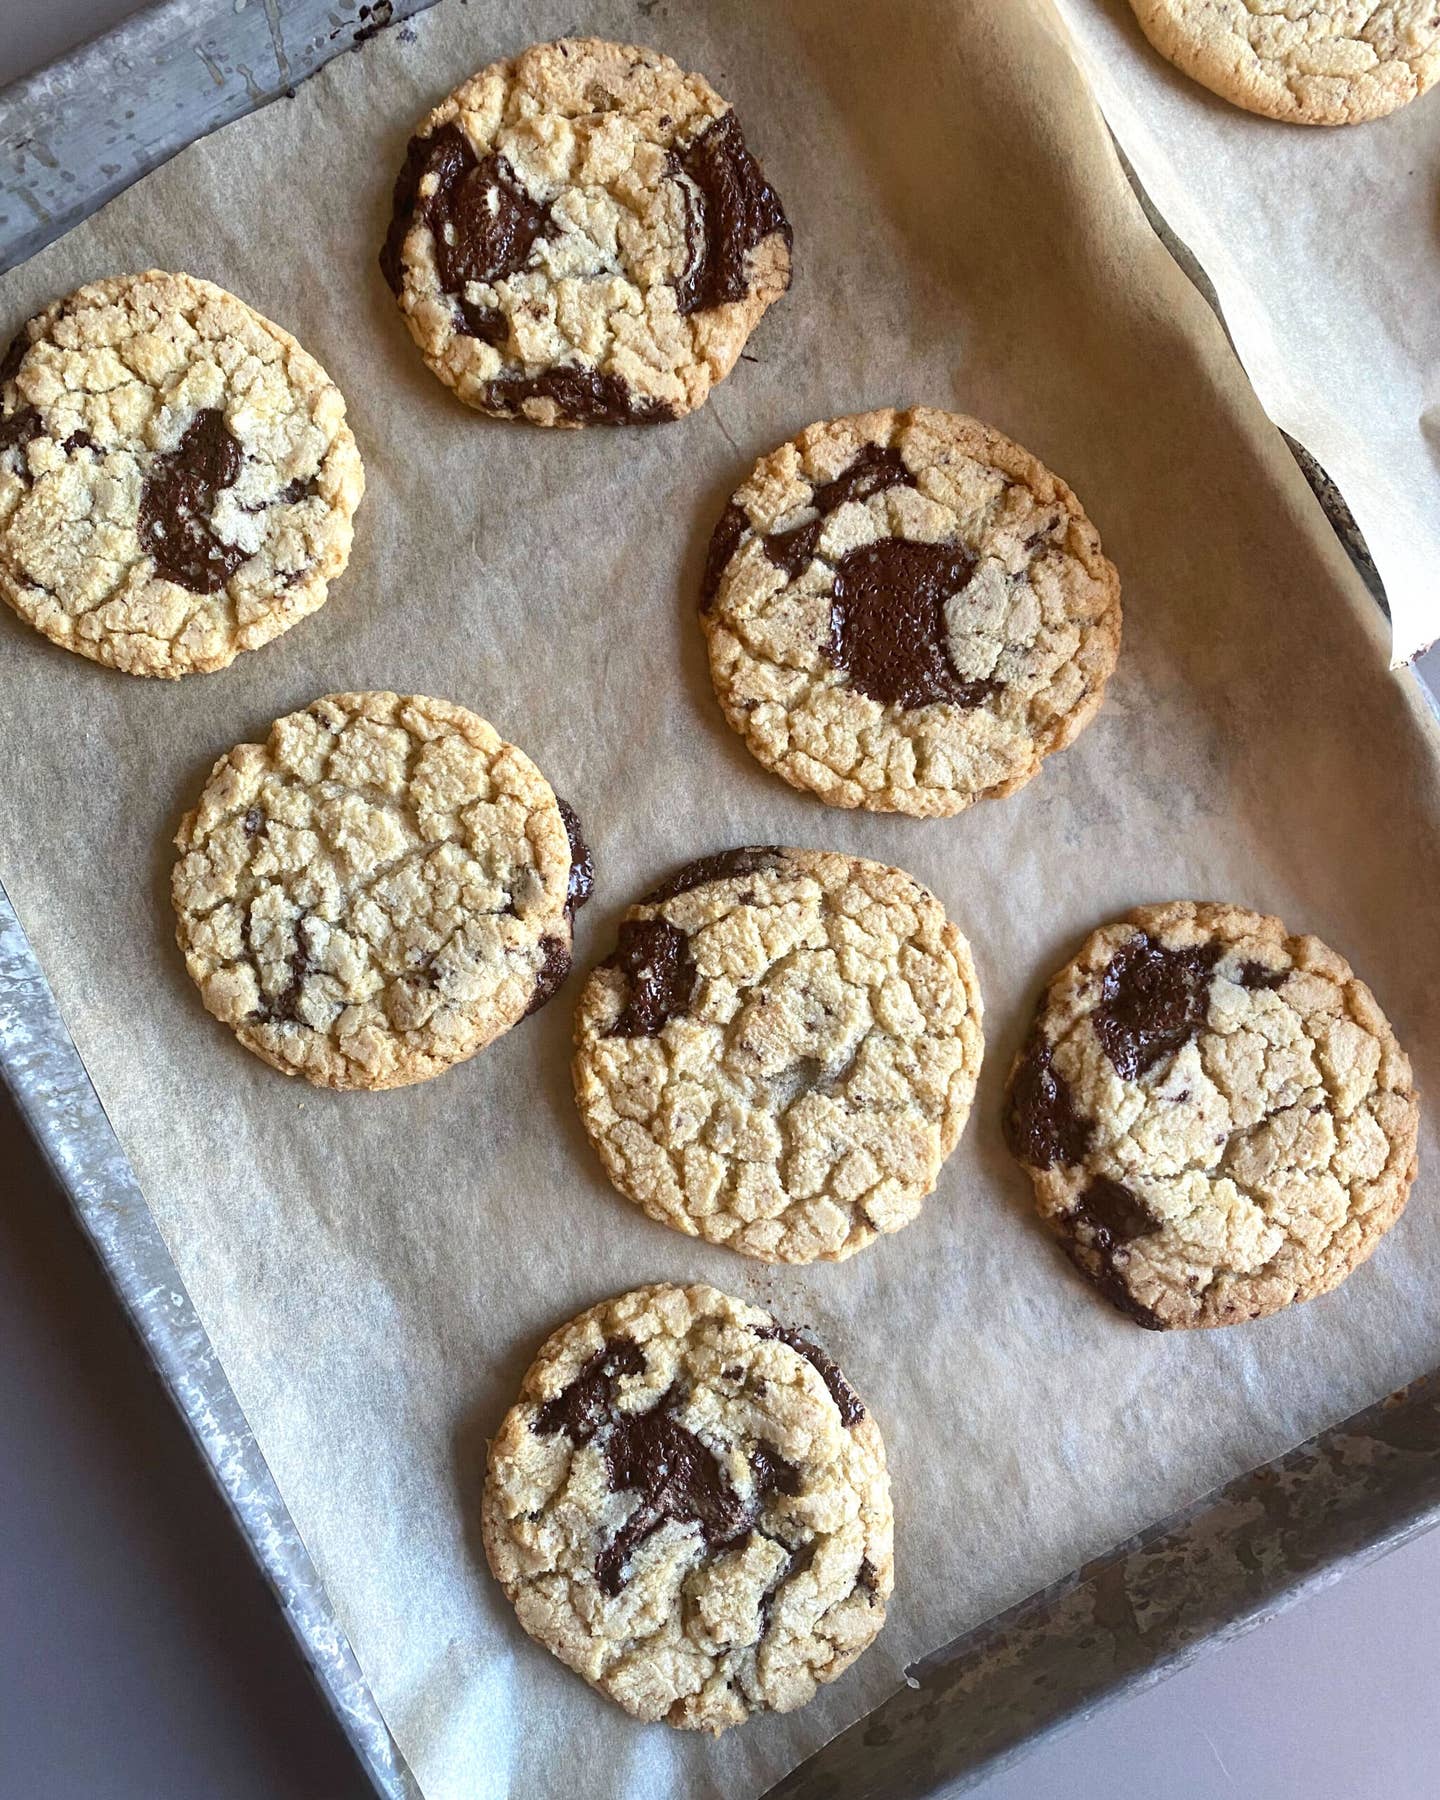 How to Make the Ultimate Chocolate Chip Cookie